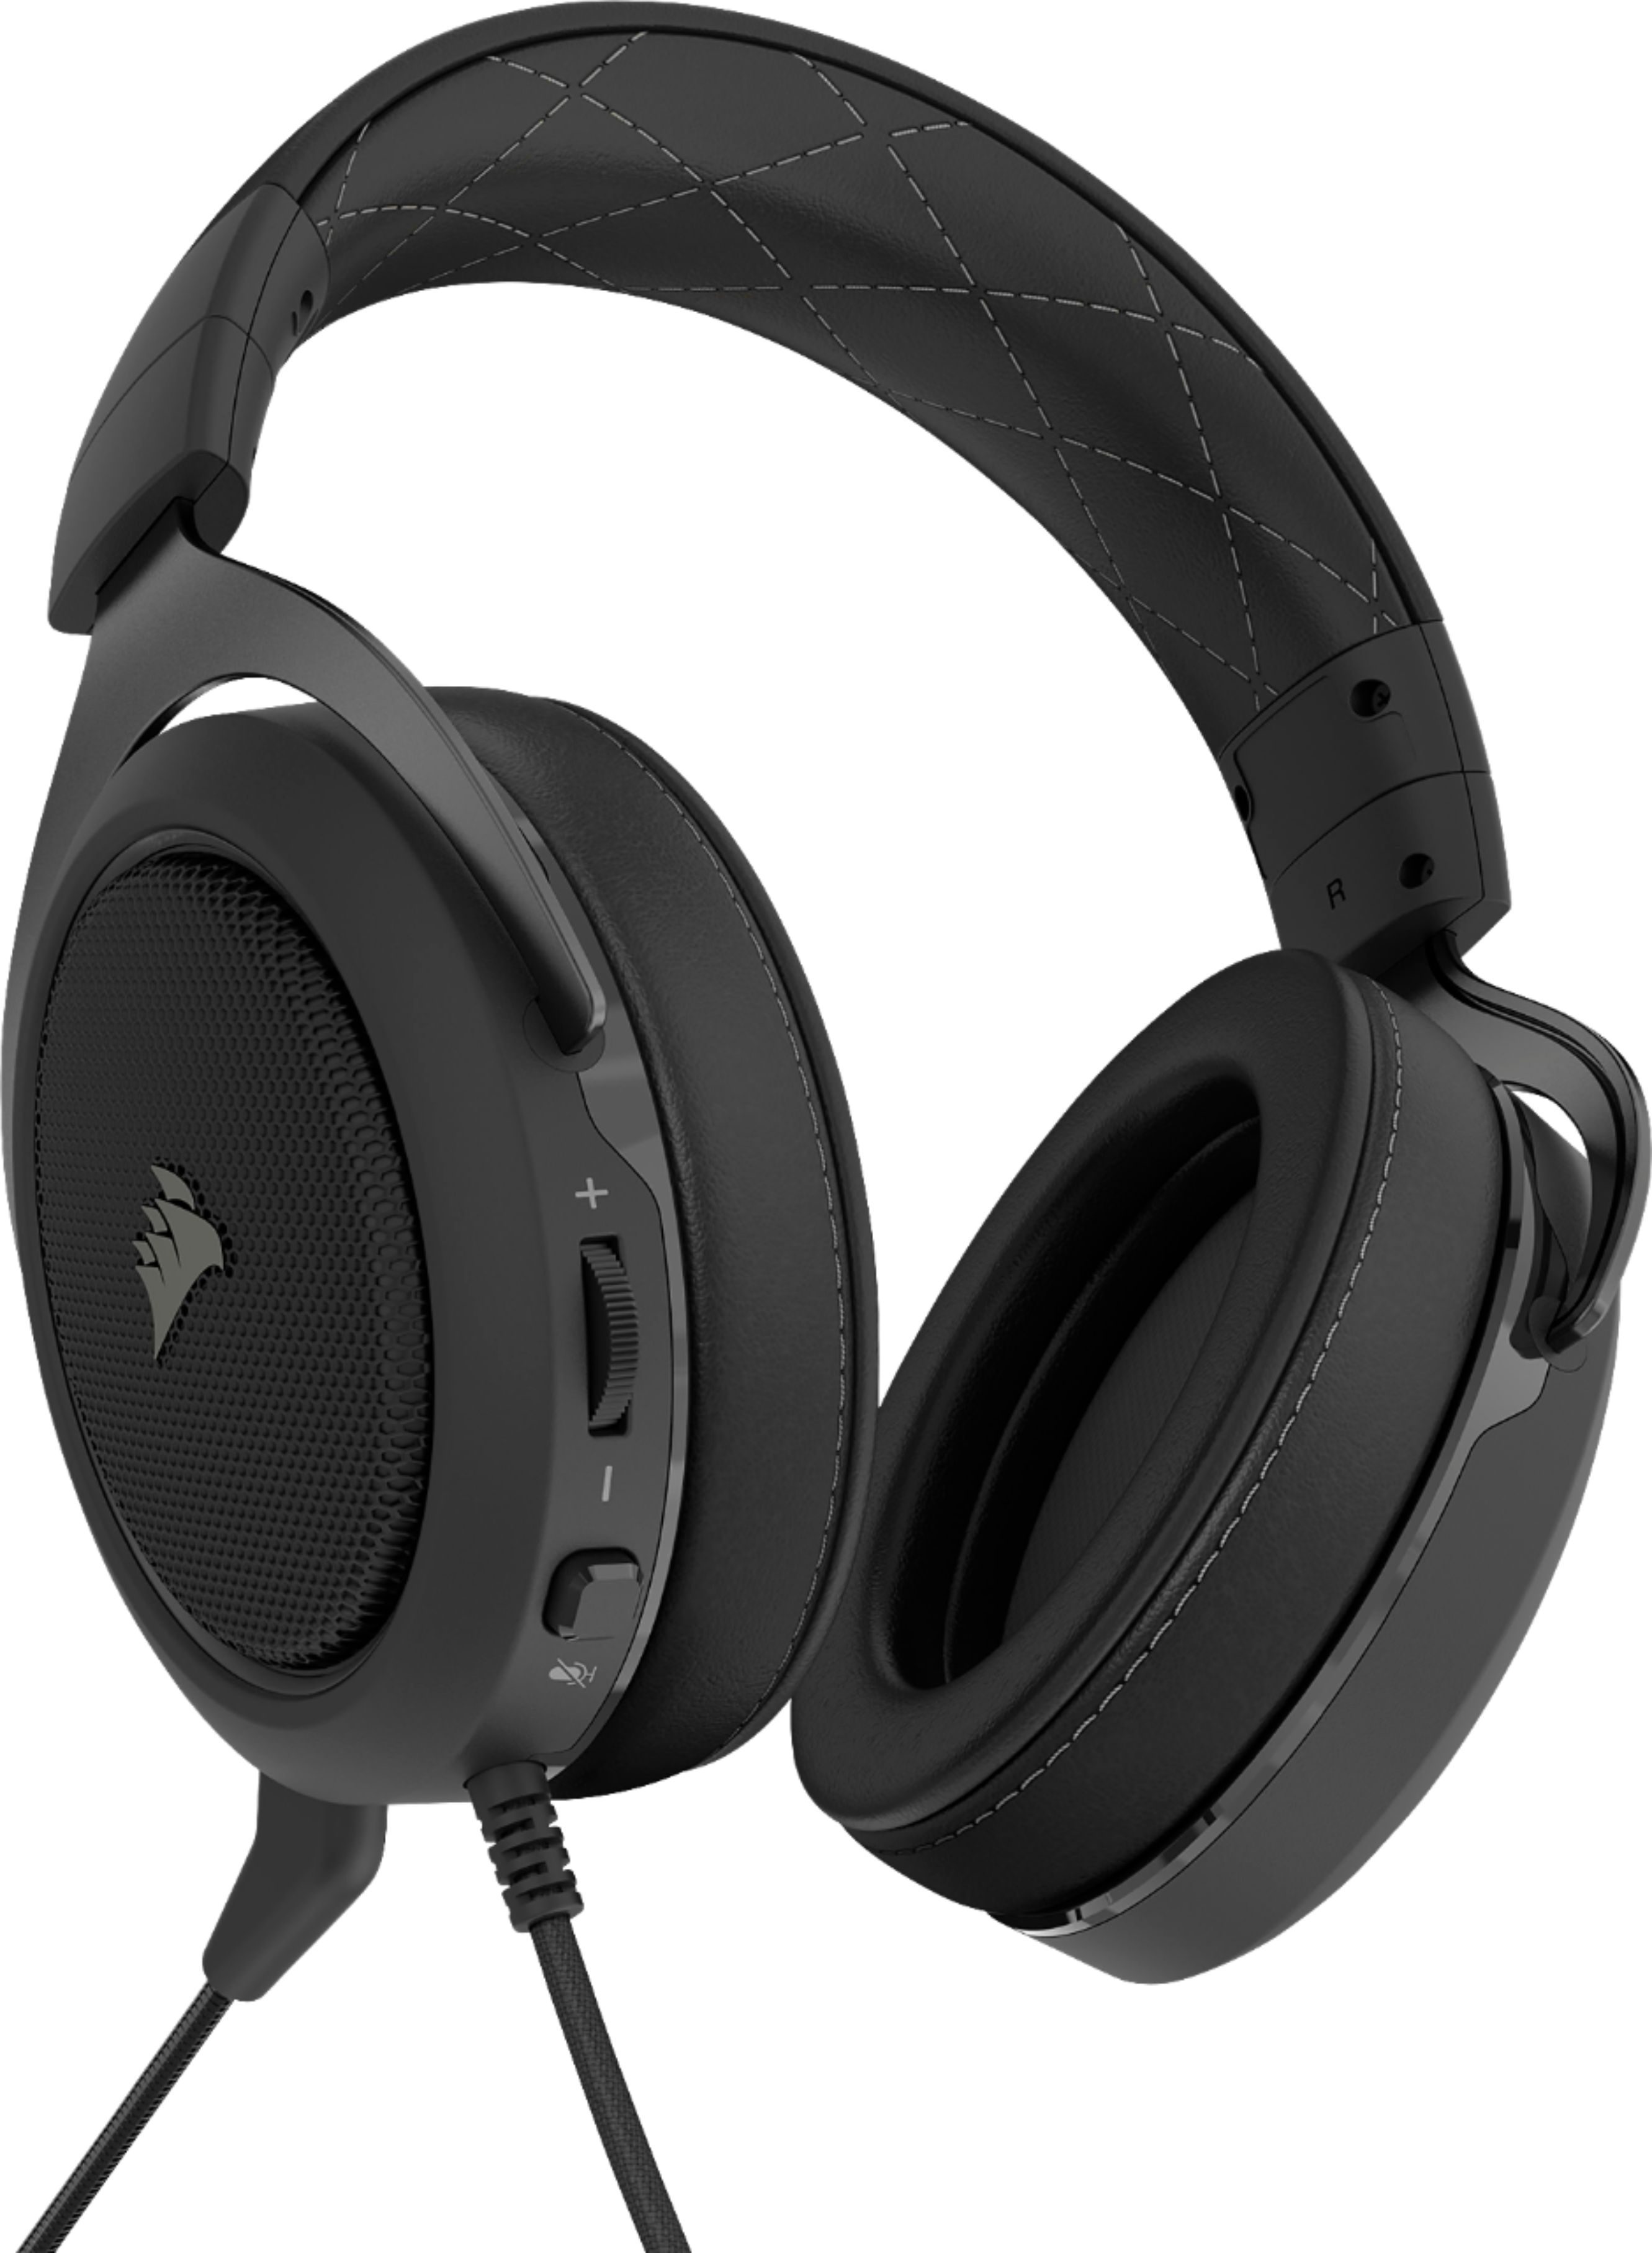 Armstrong bovenstaand een vuurtje stoken Best Buy: CORSAIR HS60 PRO SURROUND Wired Stereo Gaming Headset Carbon  CA-9011213-NA